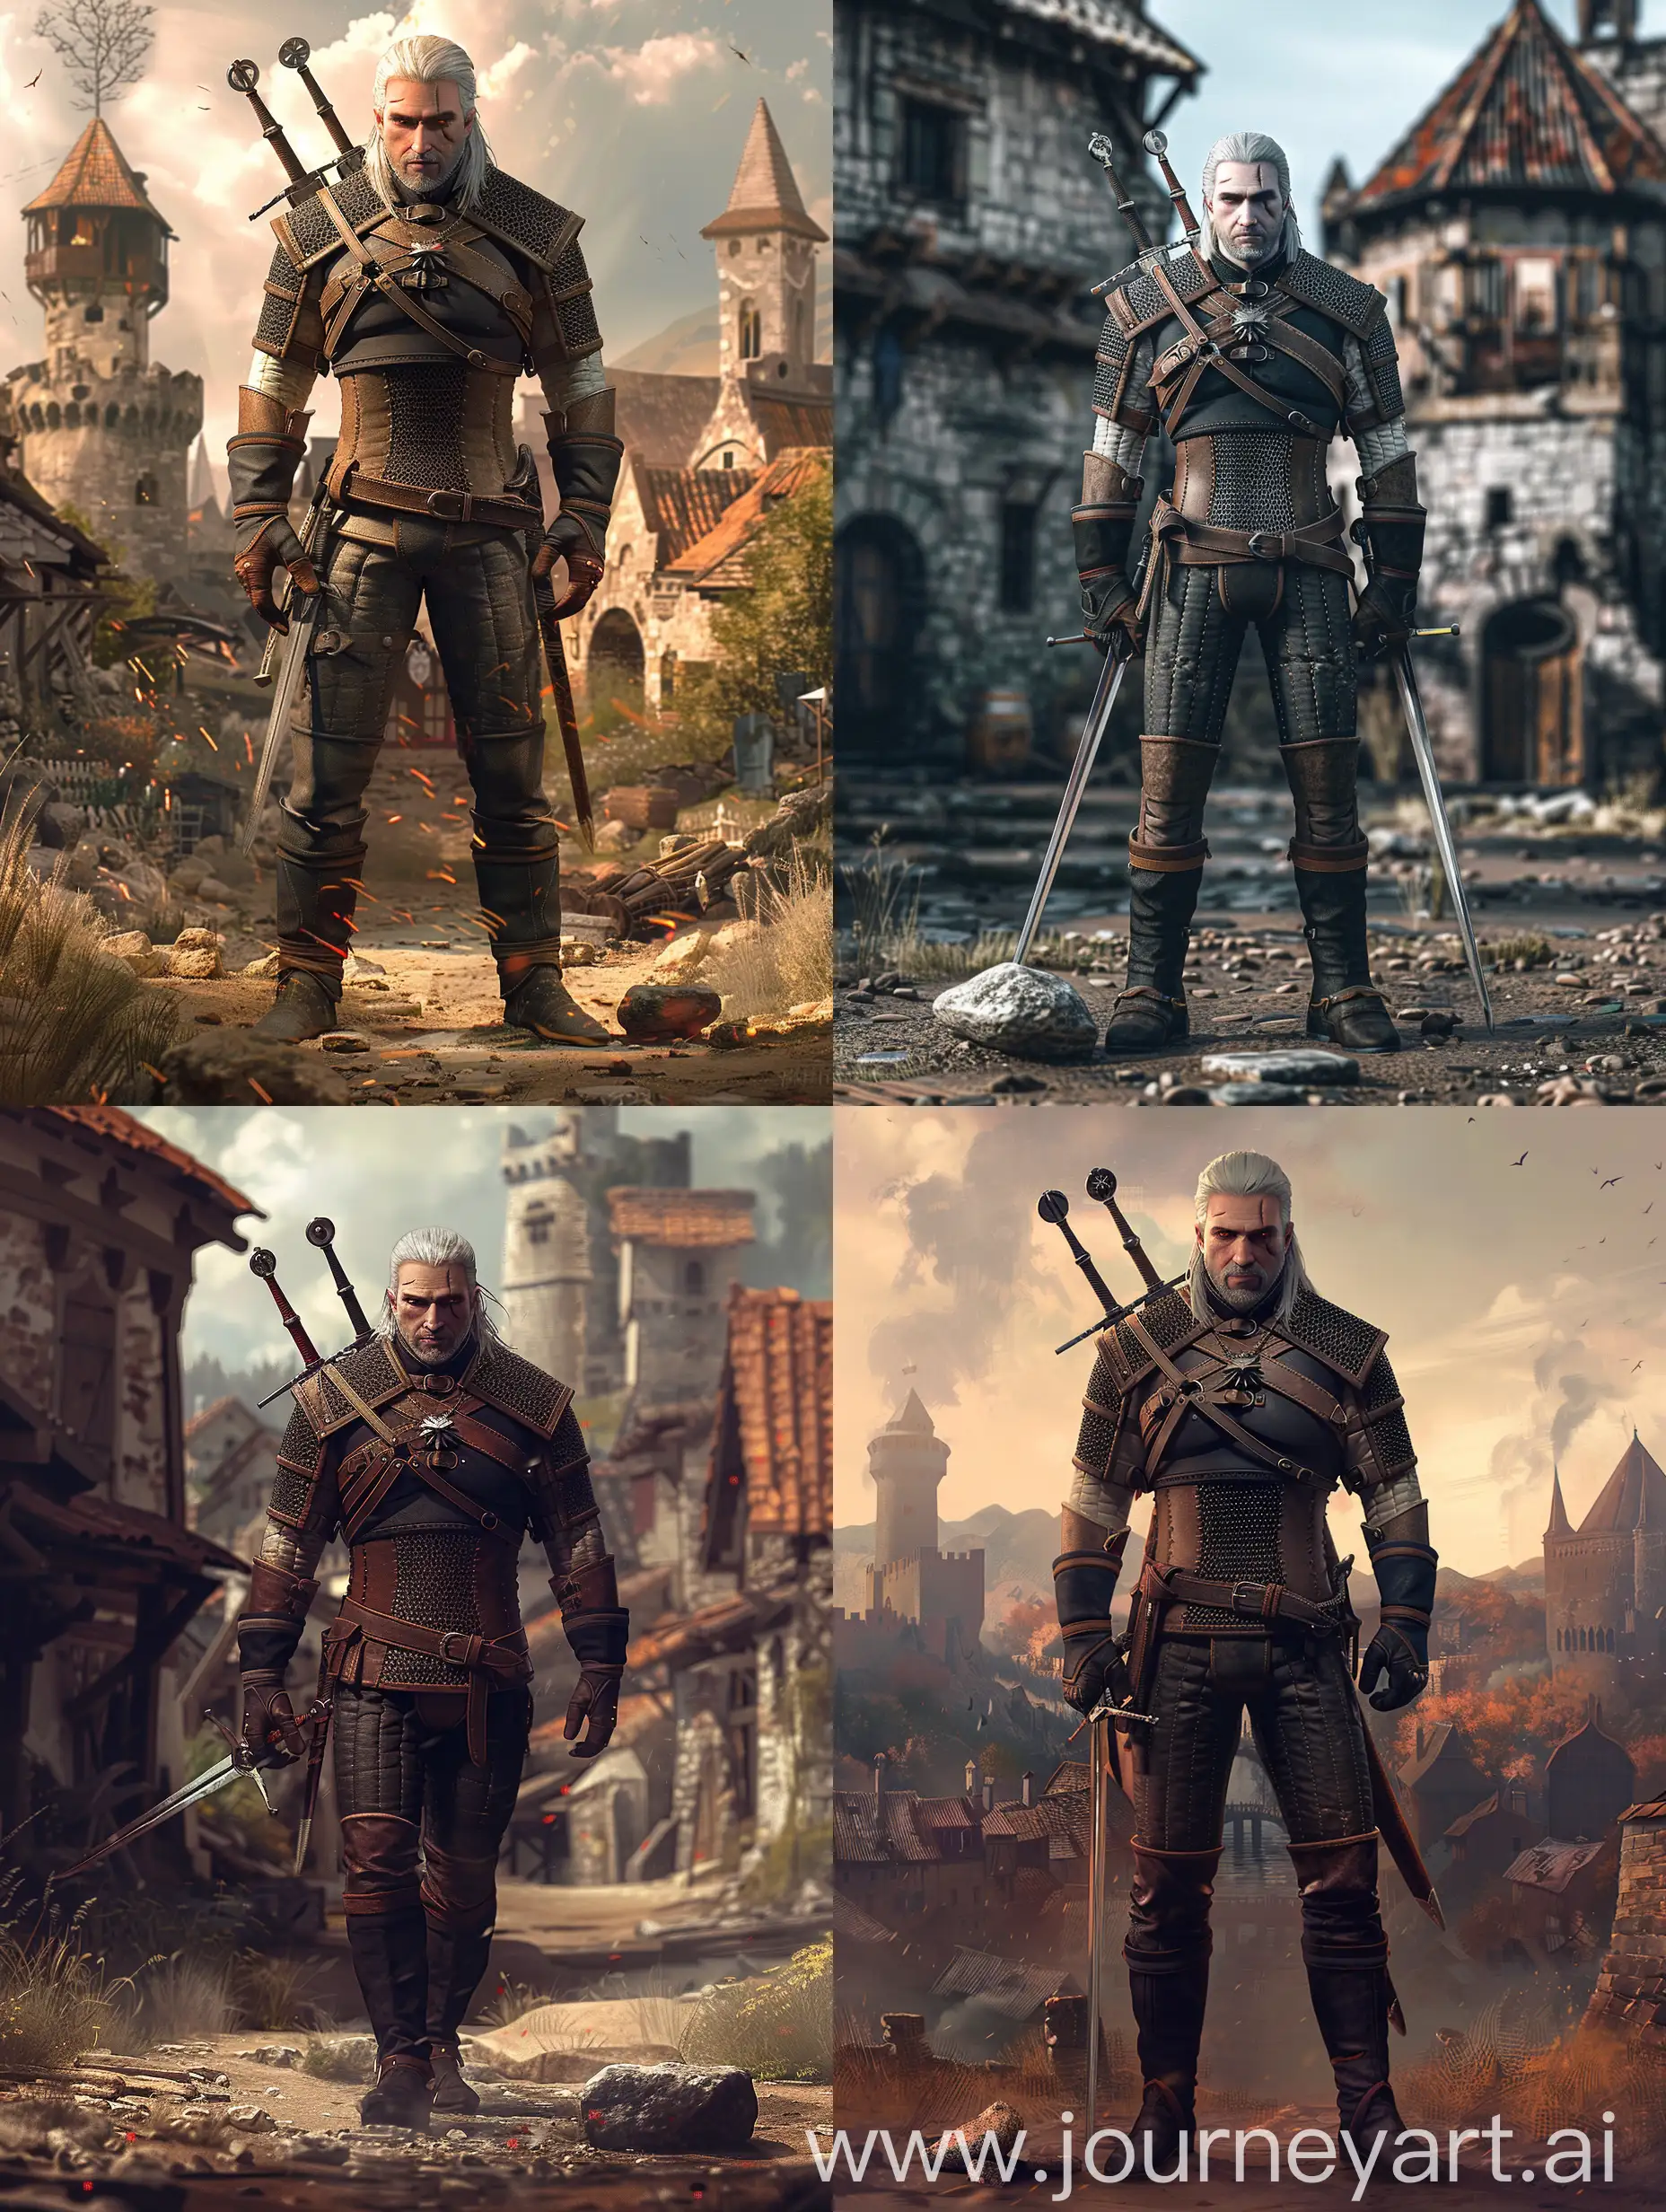 Geralt in the style of the game The Witcher 3, full-length image of the character, super realistic in 4K resolution, very detailed, detailed background of the medieval city of Novigrad, 2 swords behind his back, a small stone lies near his feet, looking forward 